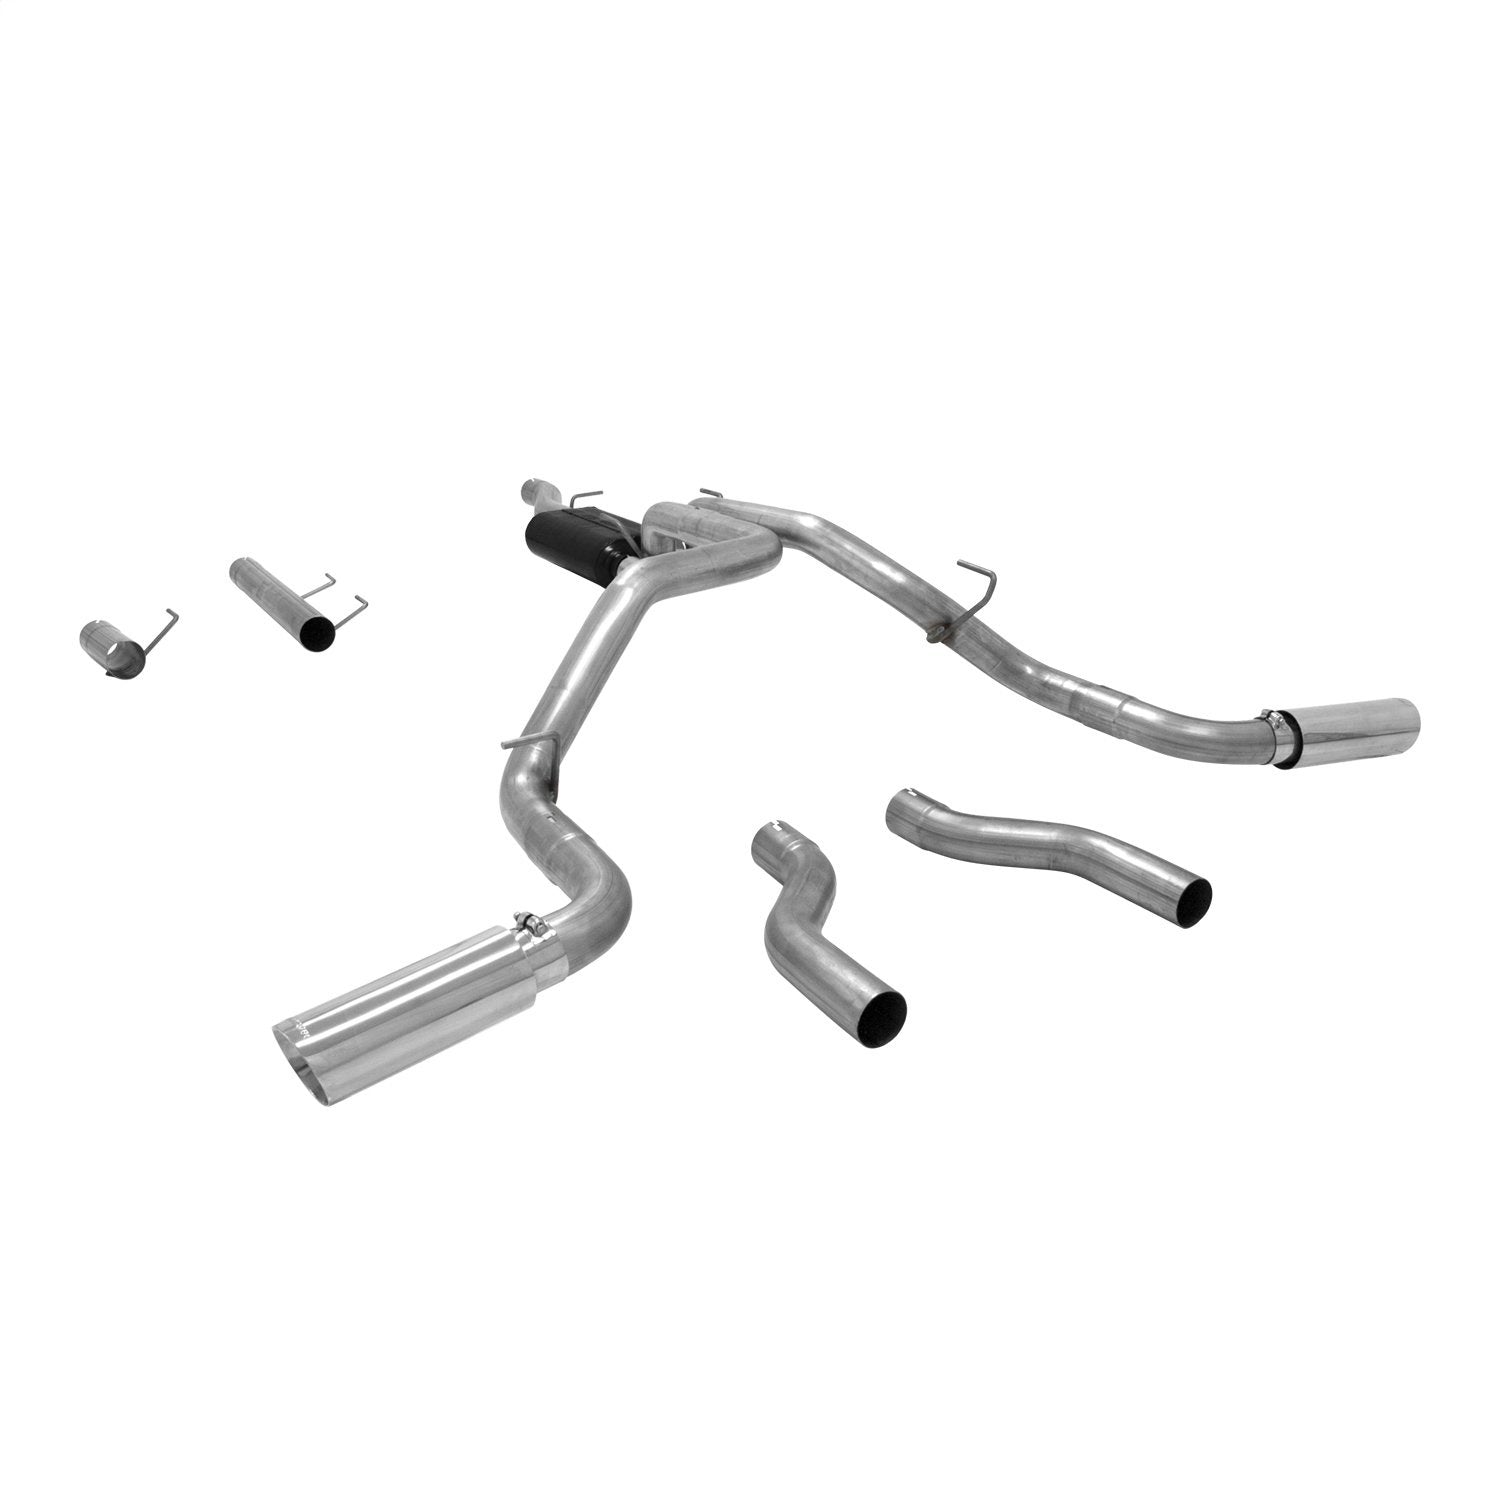 Flowmaster 817709 American Thunder Cat Back Exhaust System Fits 14-21 2500